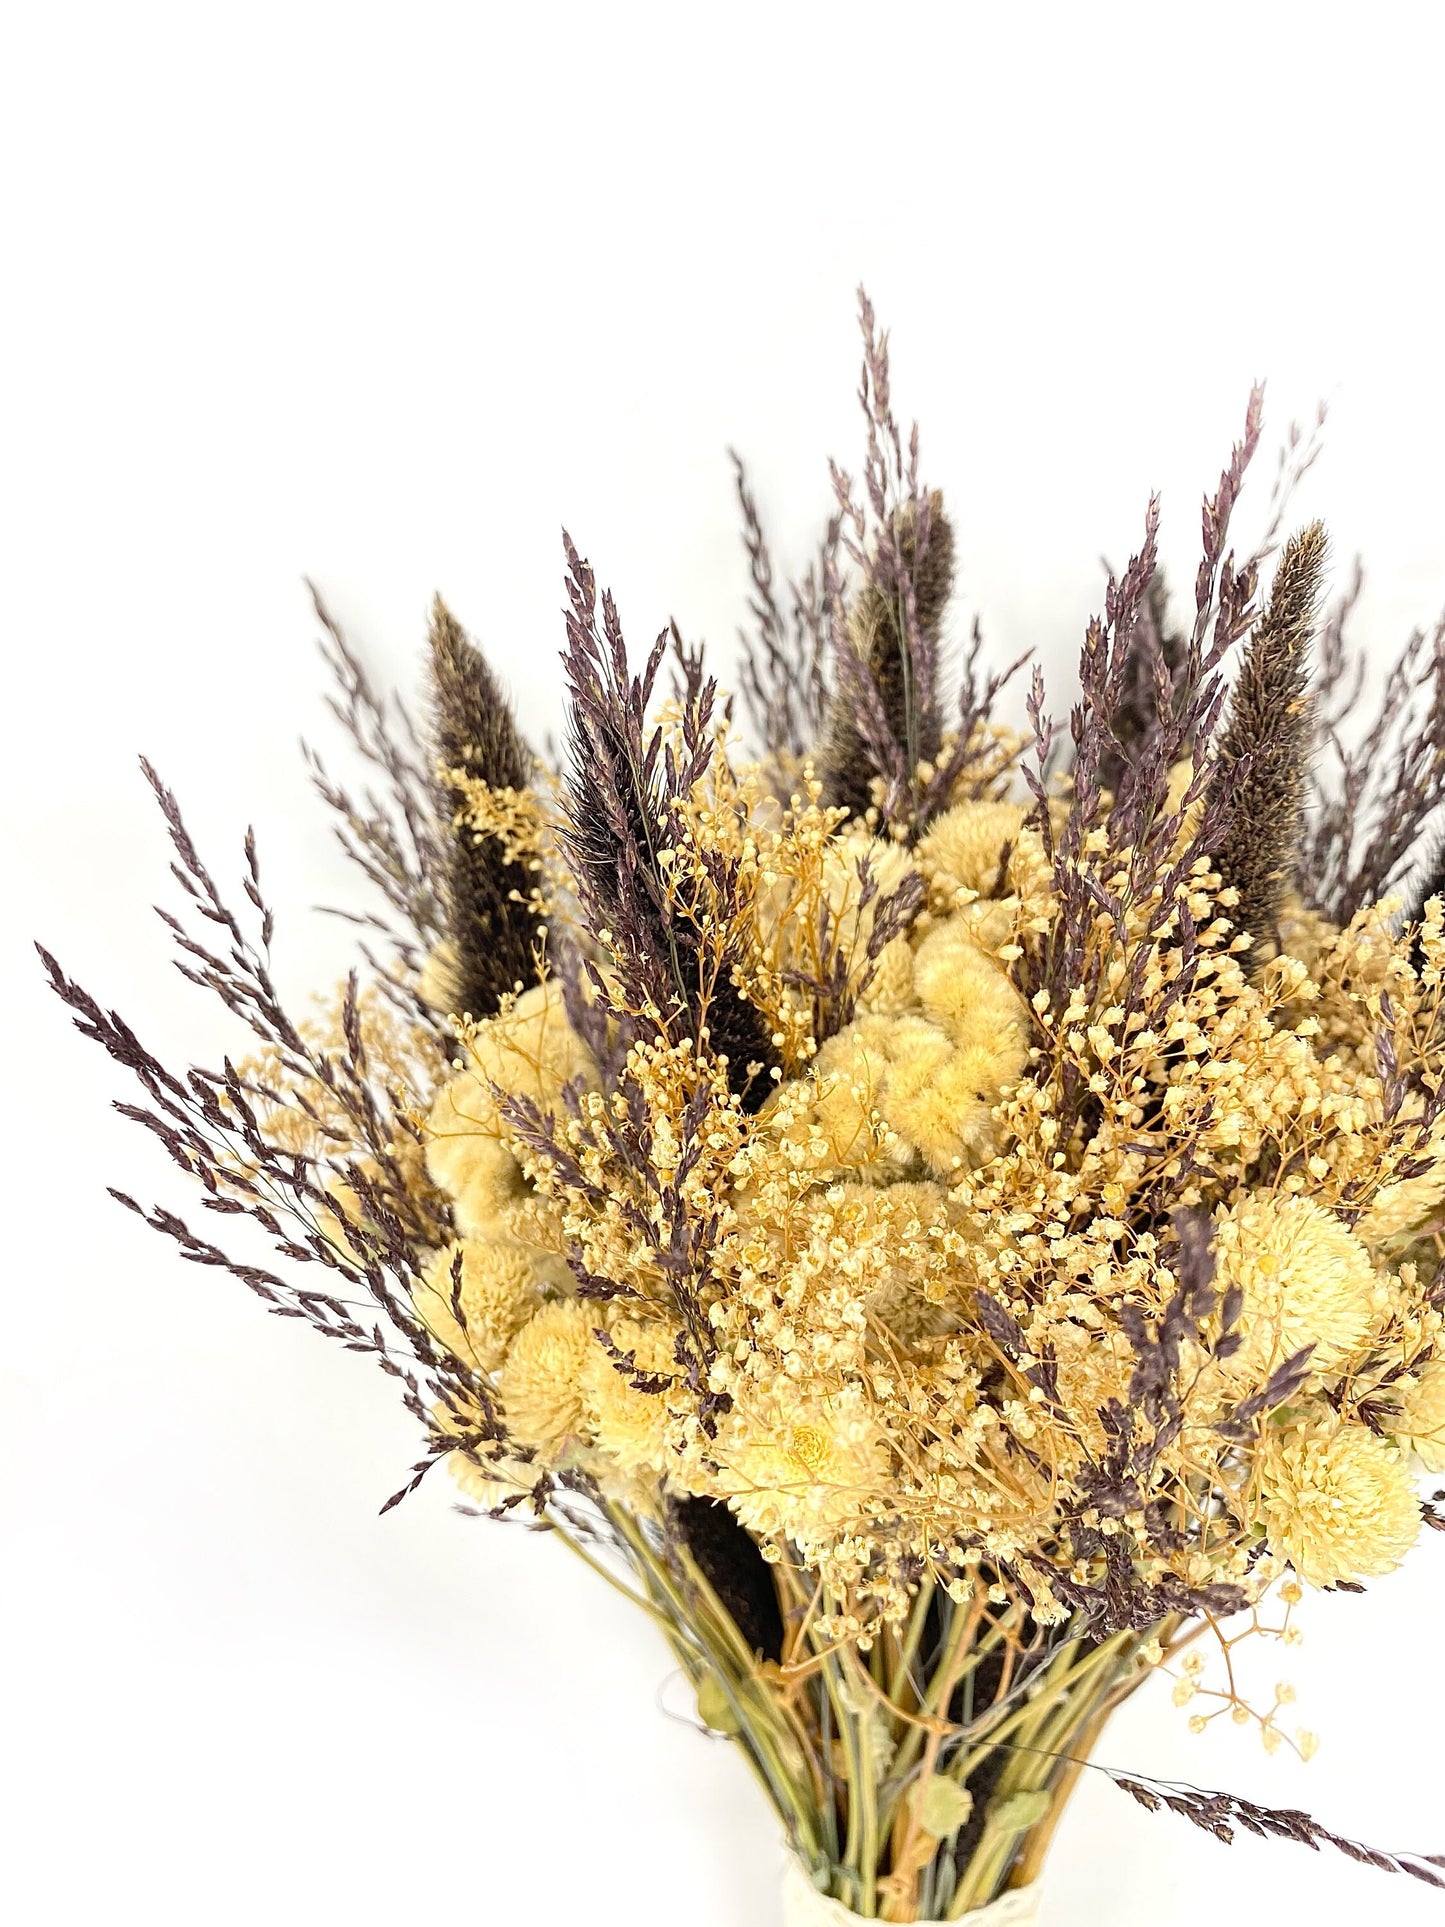 Fall Bouquet, Wedding Floral, Preserved Flowers, Cream, Coxcomb, Bridal, Rustic, Dark Purple, Natural, Throw Bouquet